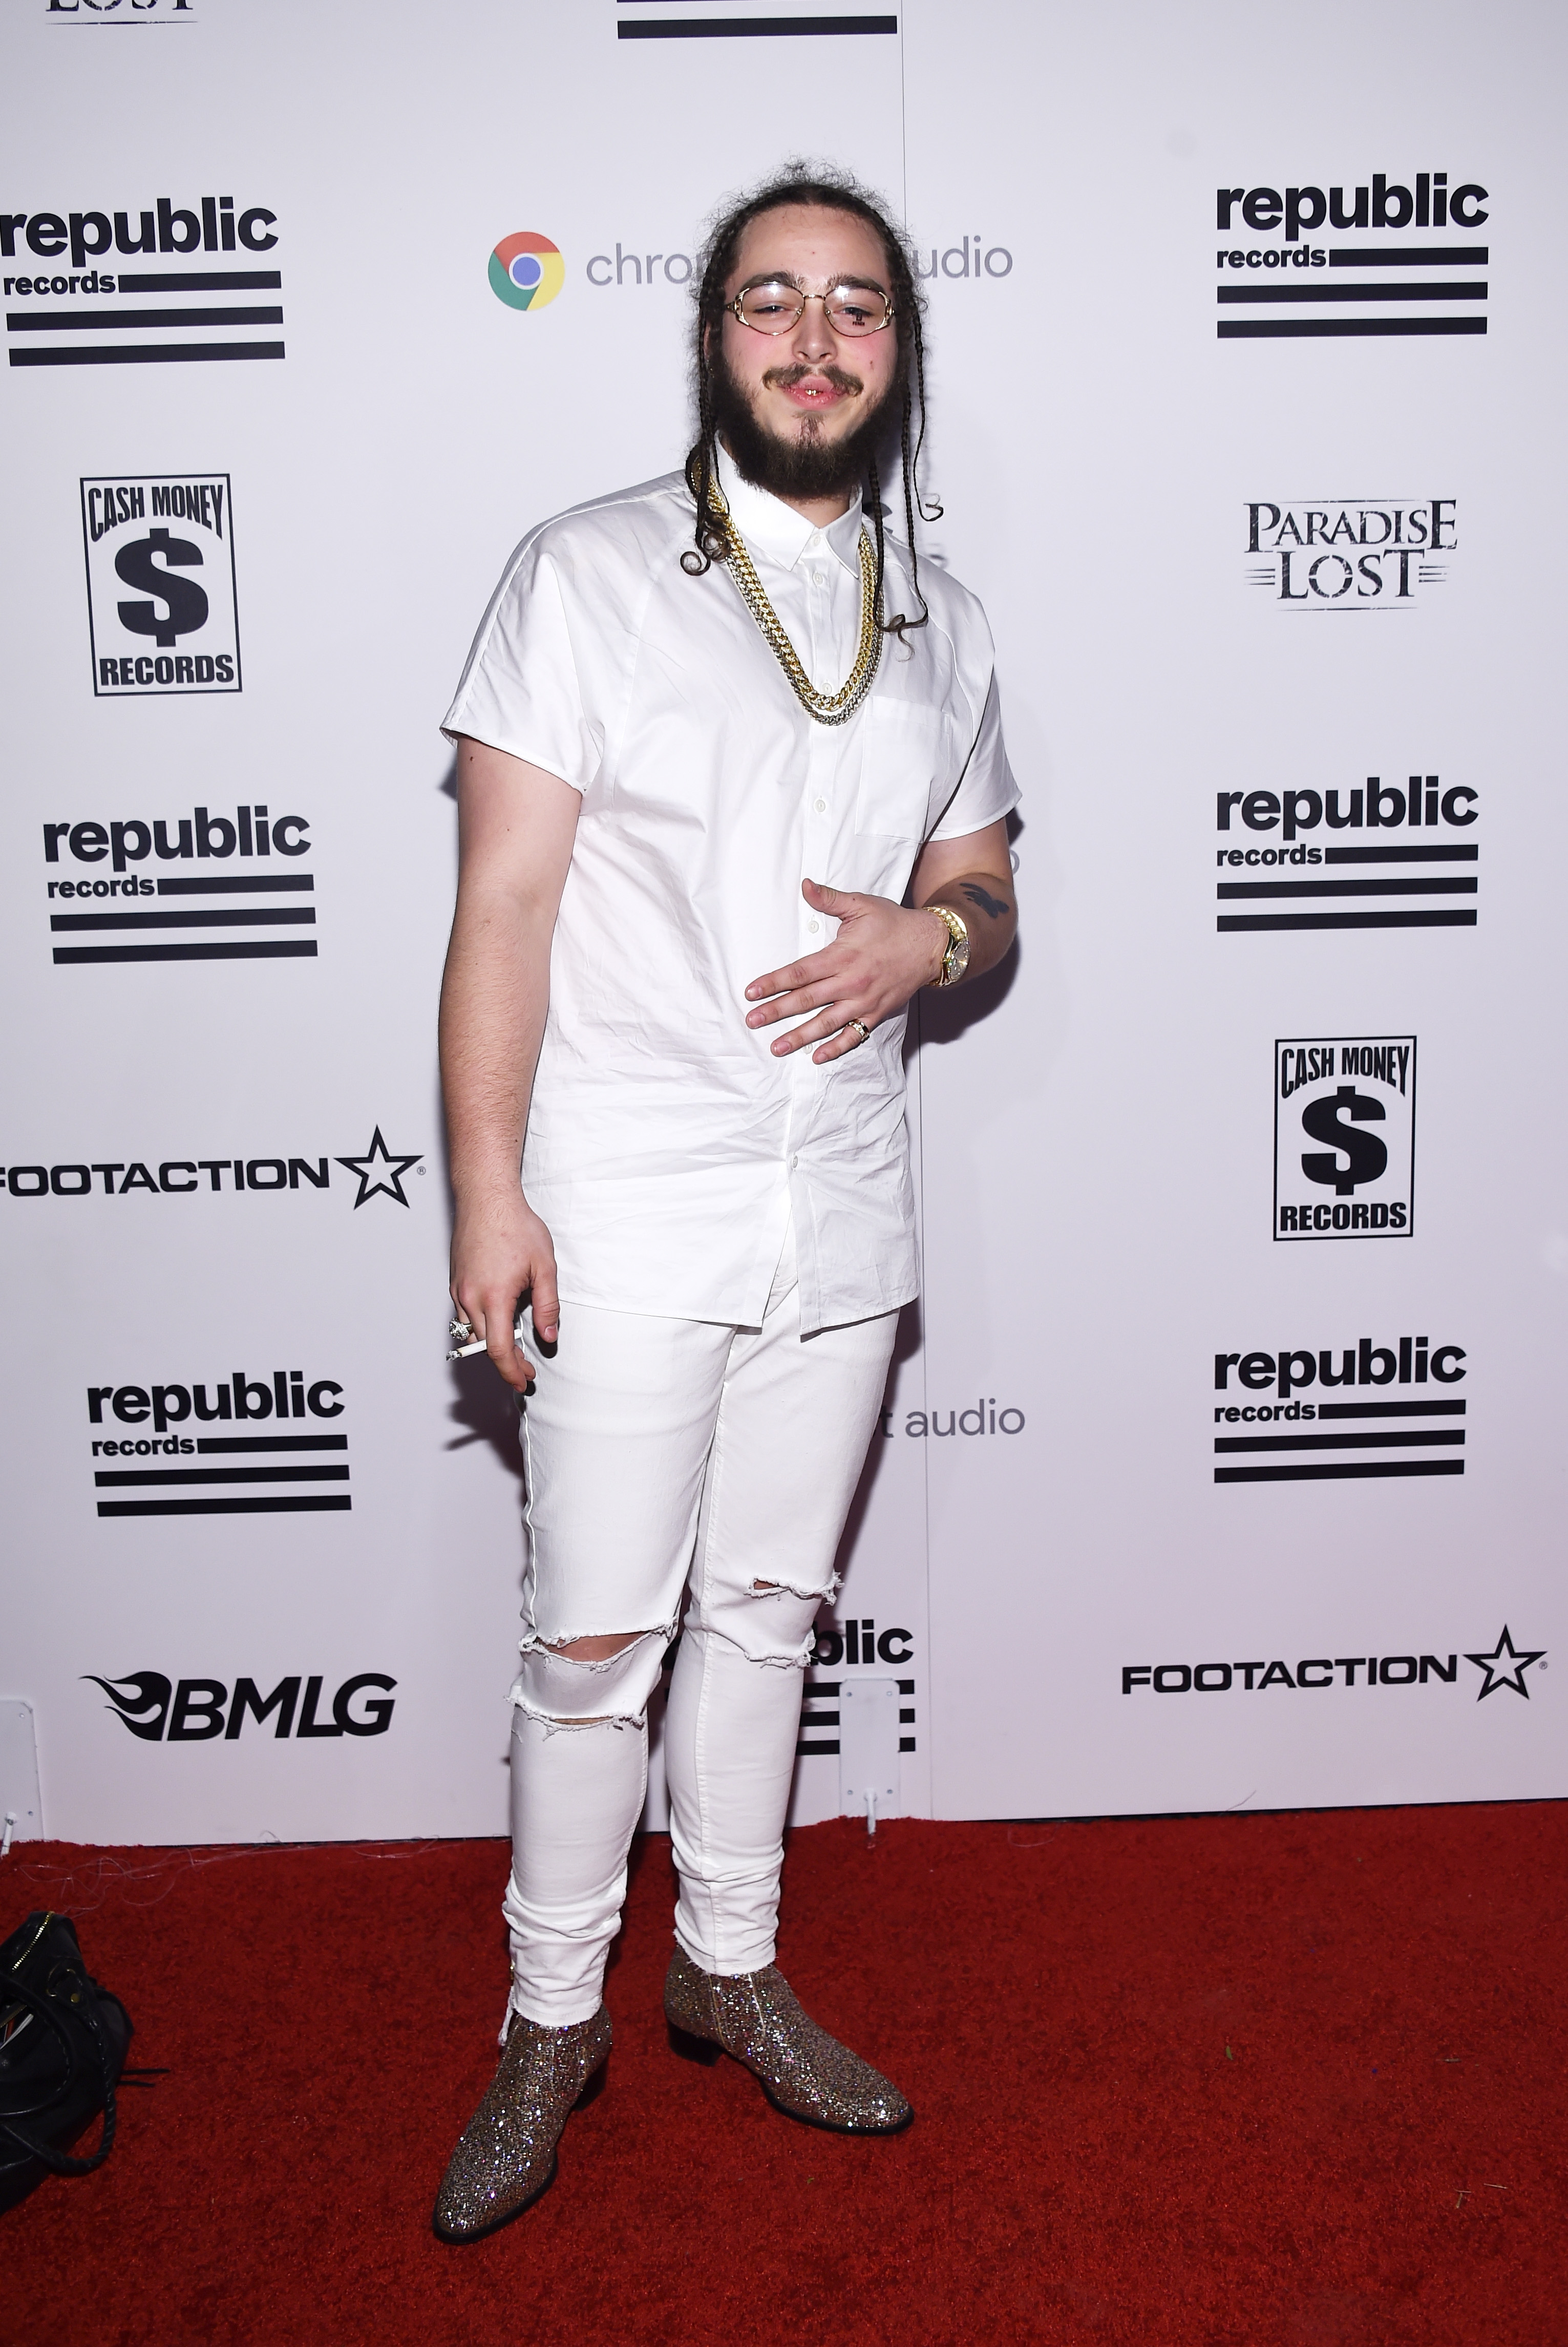 The rapper sported a stocky build when he first made a slash in the hip-hop world with his smash hit White Iverson in 2016